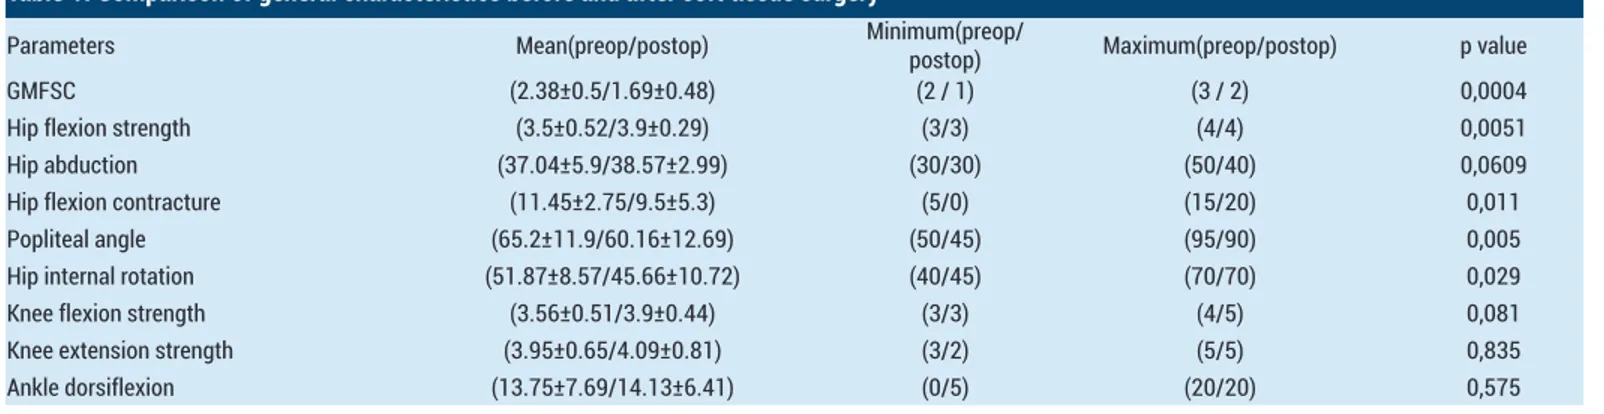 Table 2. Comparison of kinematik parameters before and after soft tissue surgery